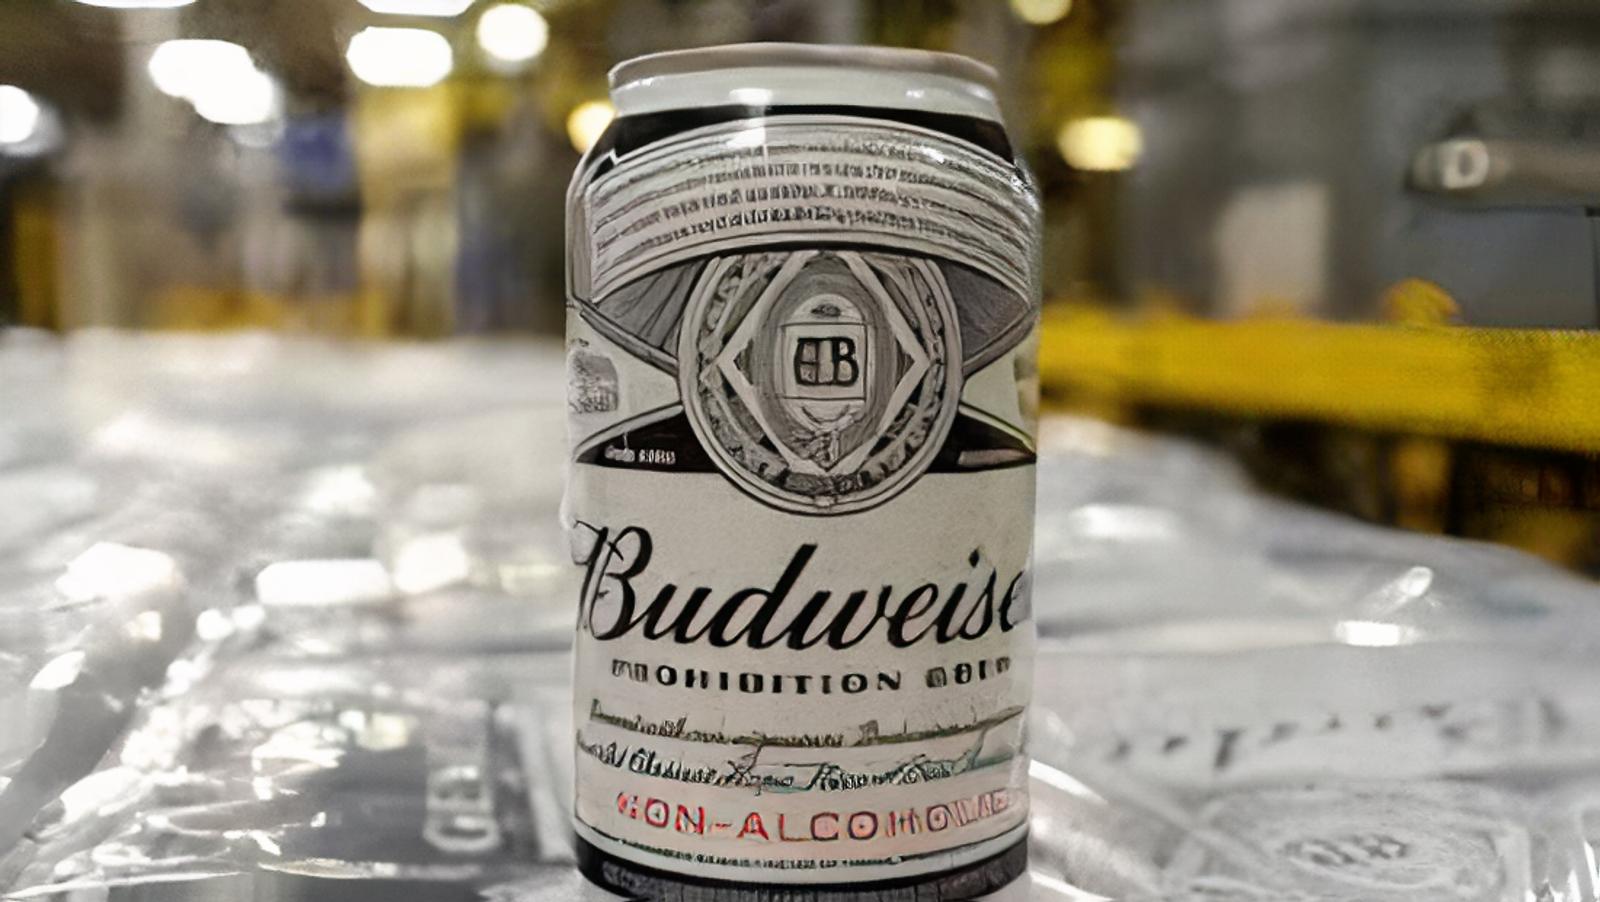 Budweiser Prohibition (Non-Alcoholic Beer)